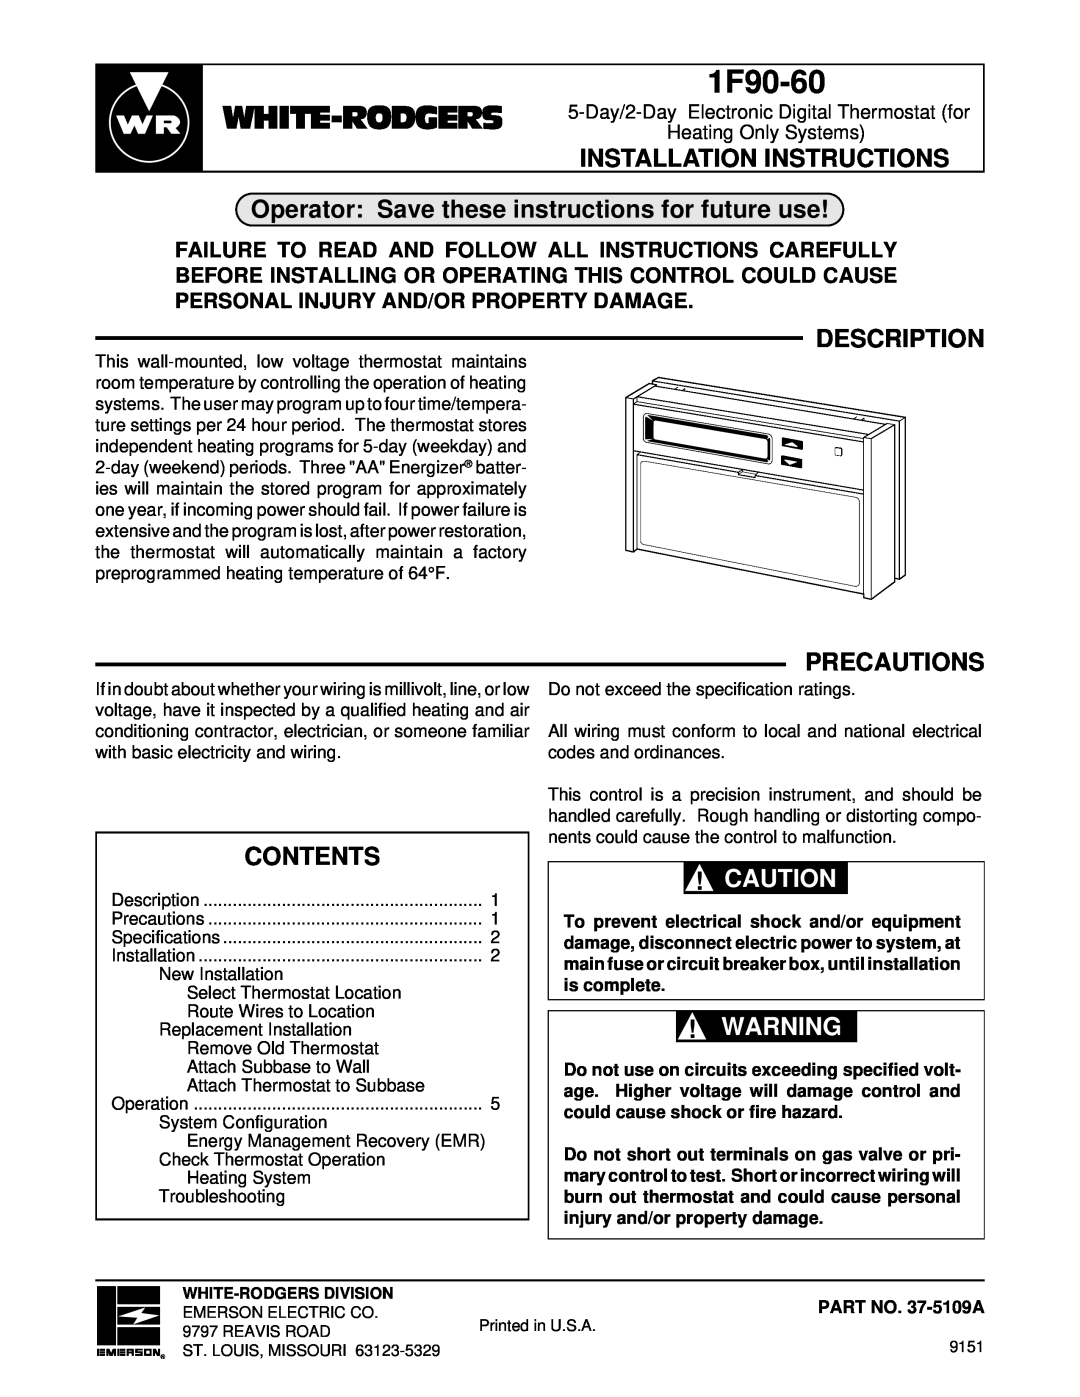 White Rodgers 1F90-60 installation instructions Operator Save these instructions for future use, Description, Precautions 